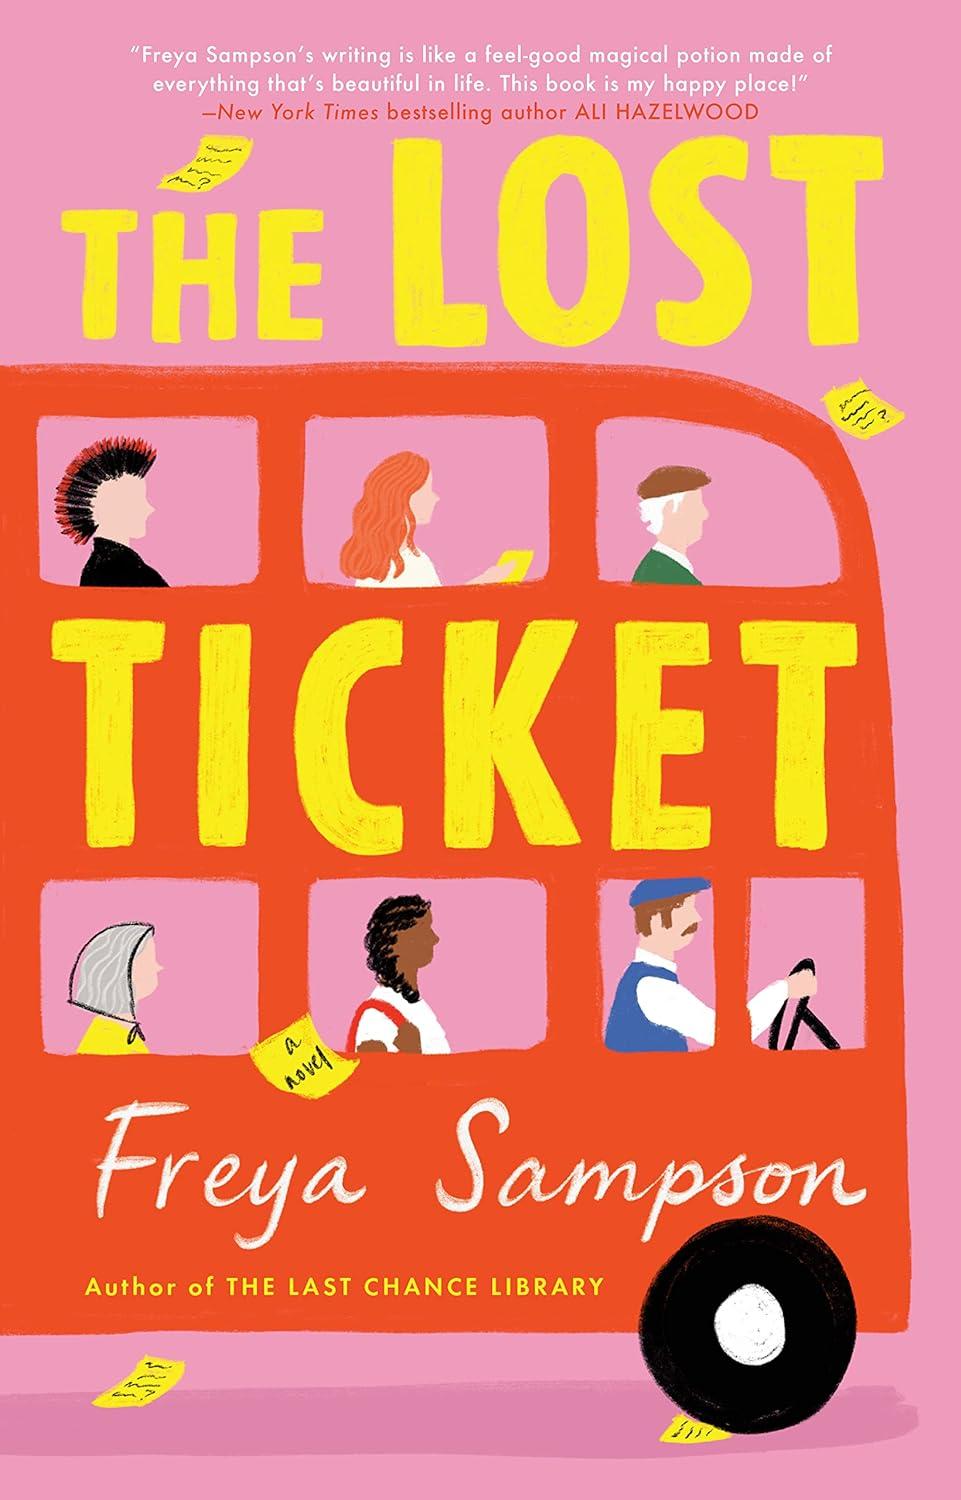 The Lost Ticket image